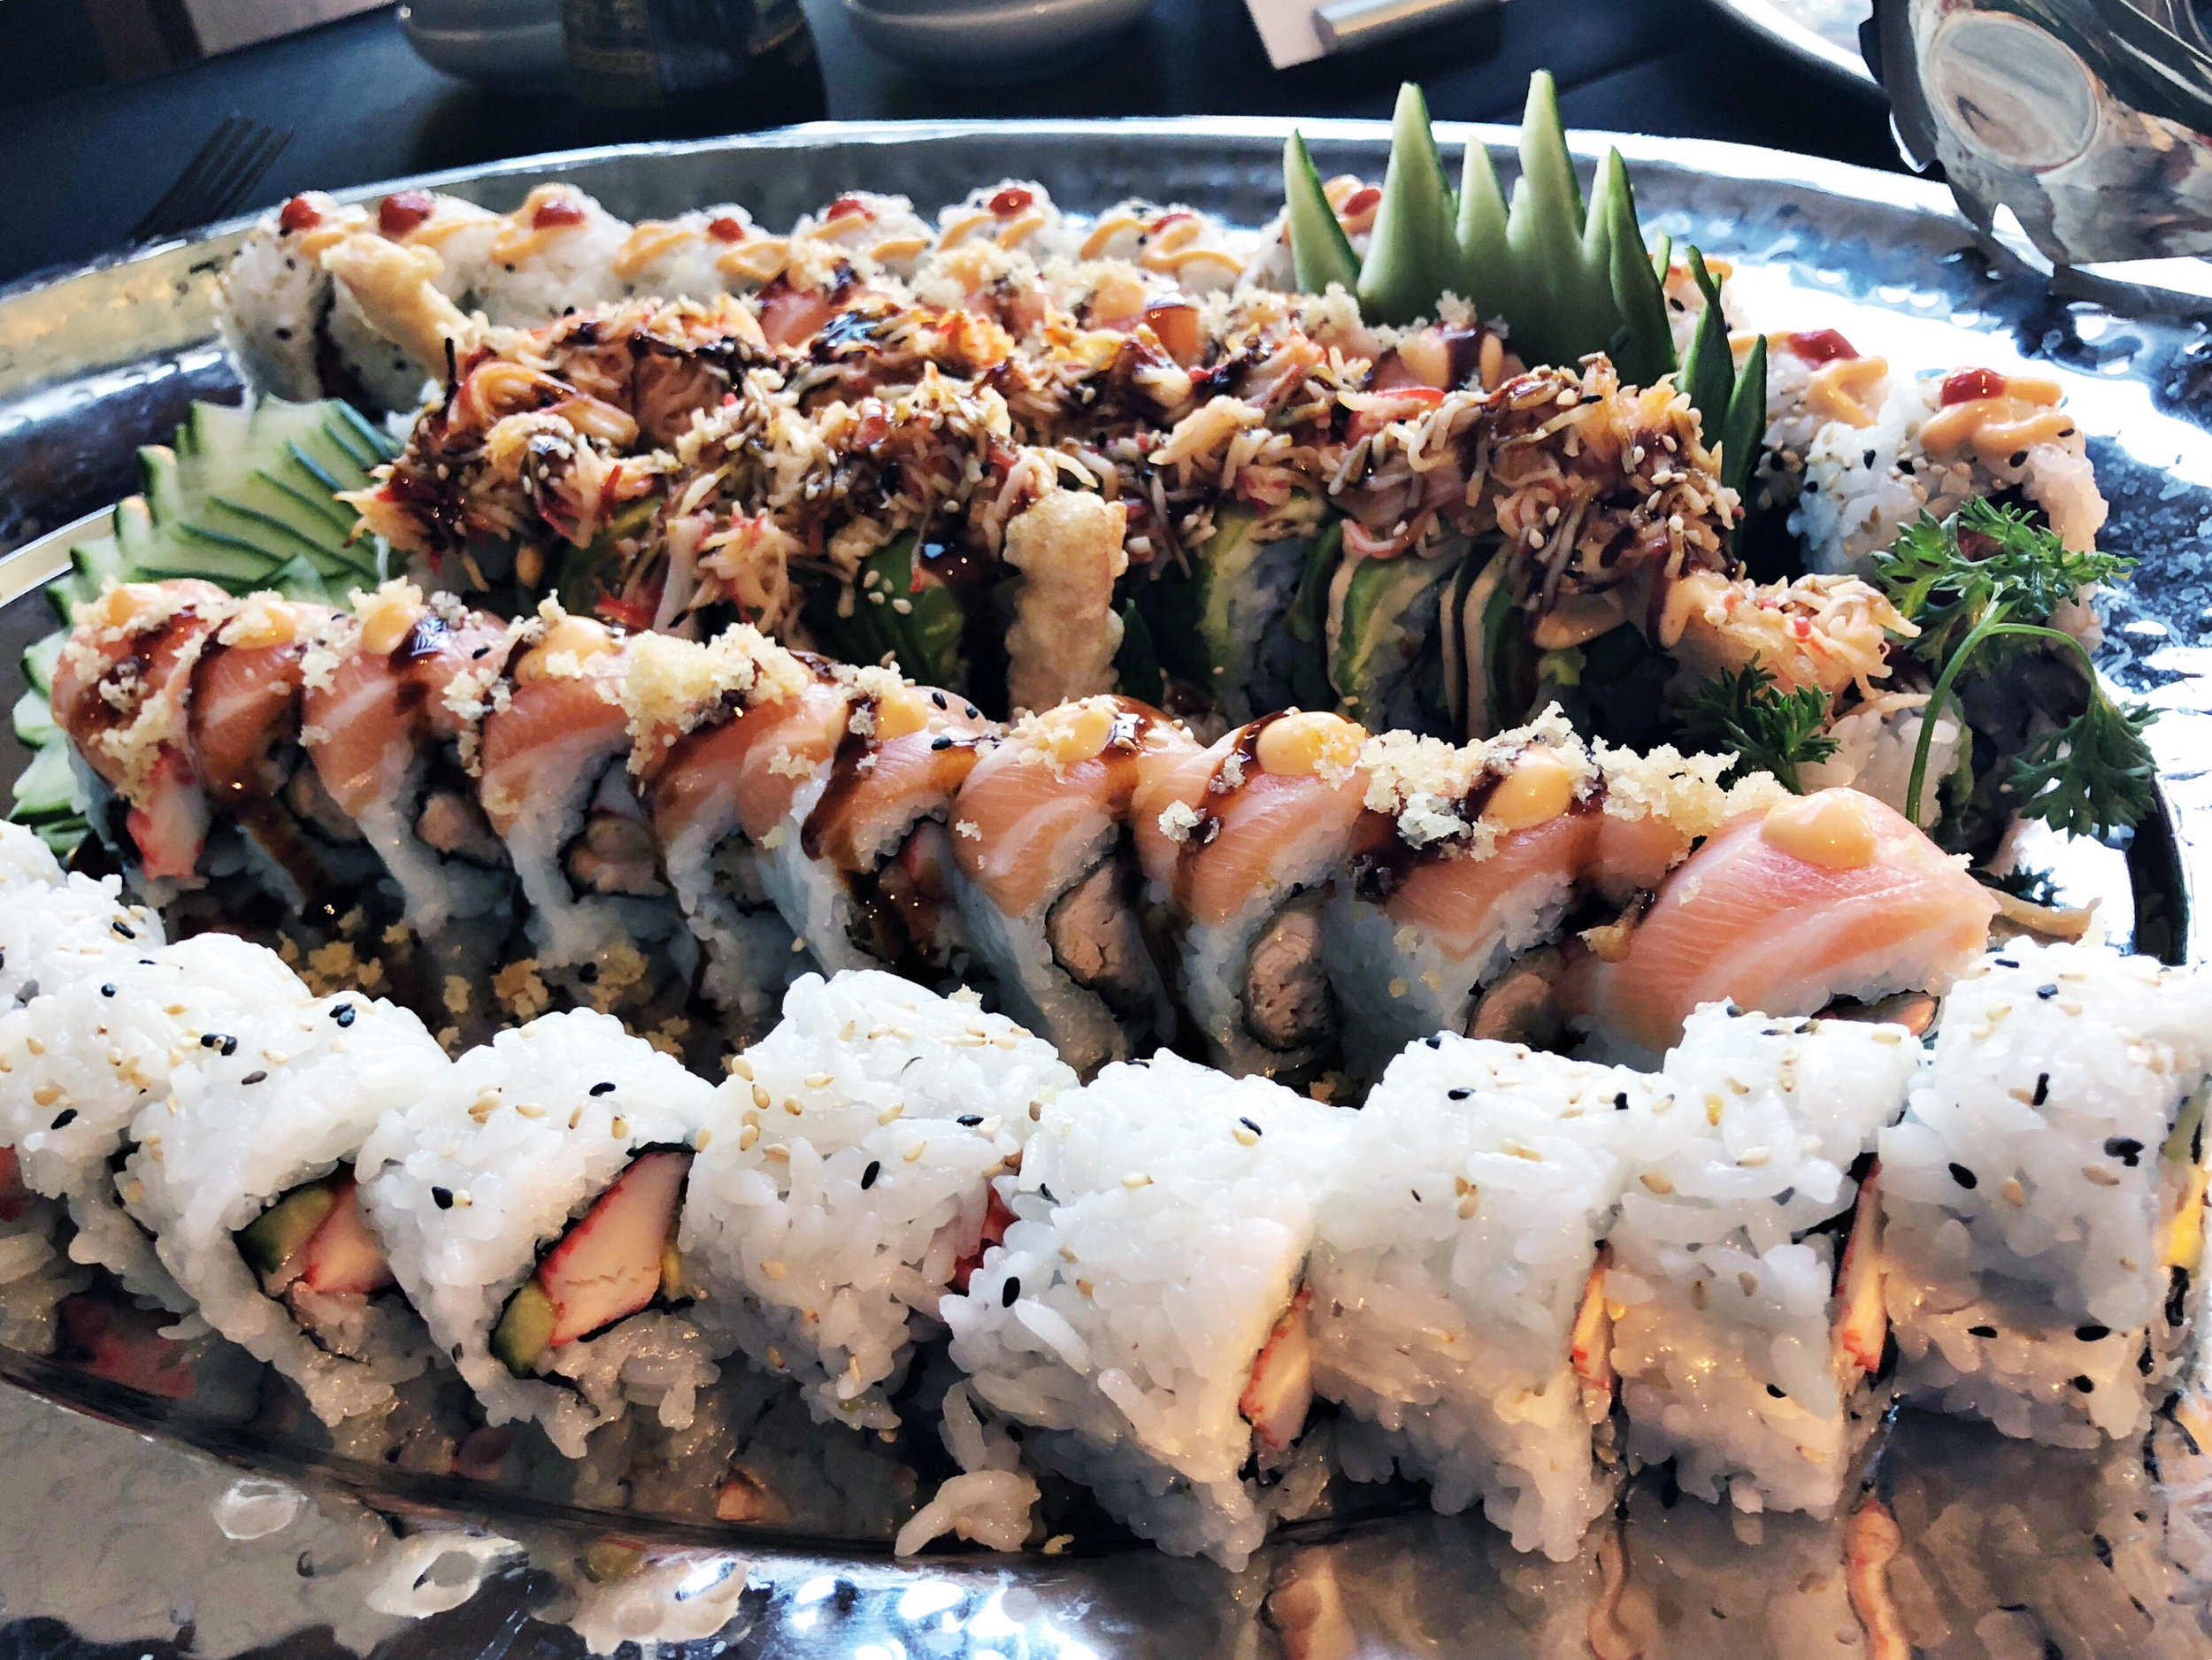 Splitzville offers a wide selection of menu items, including sushi.